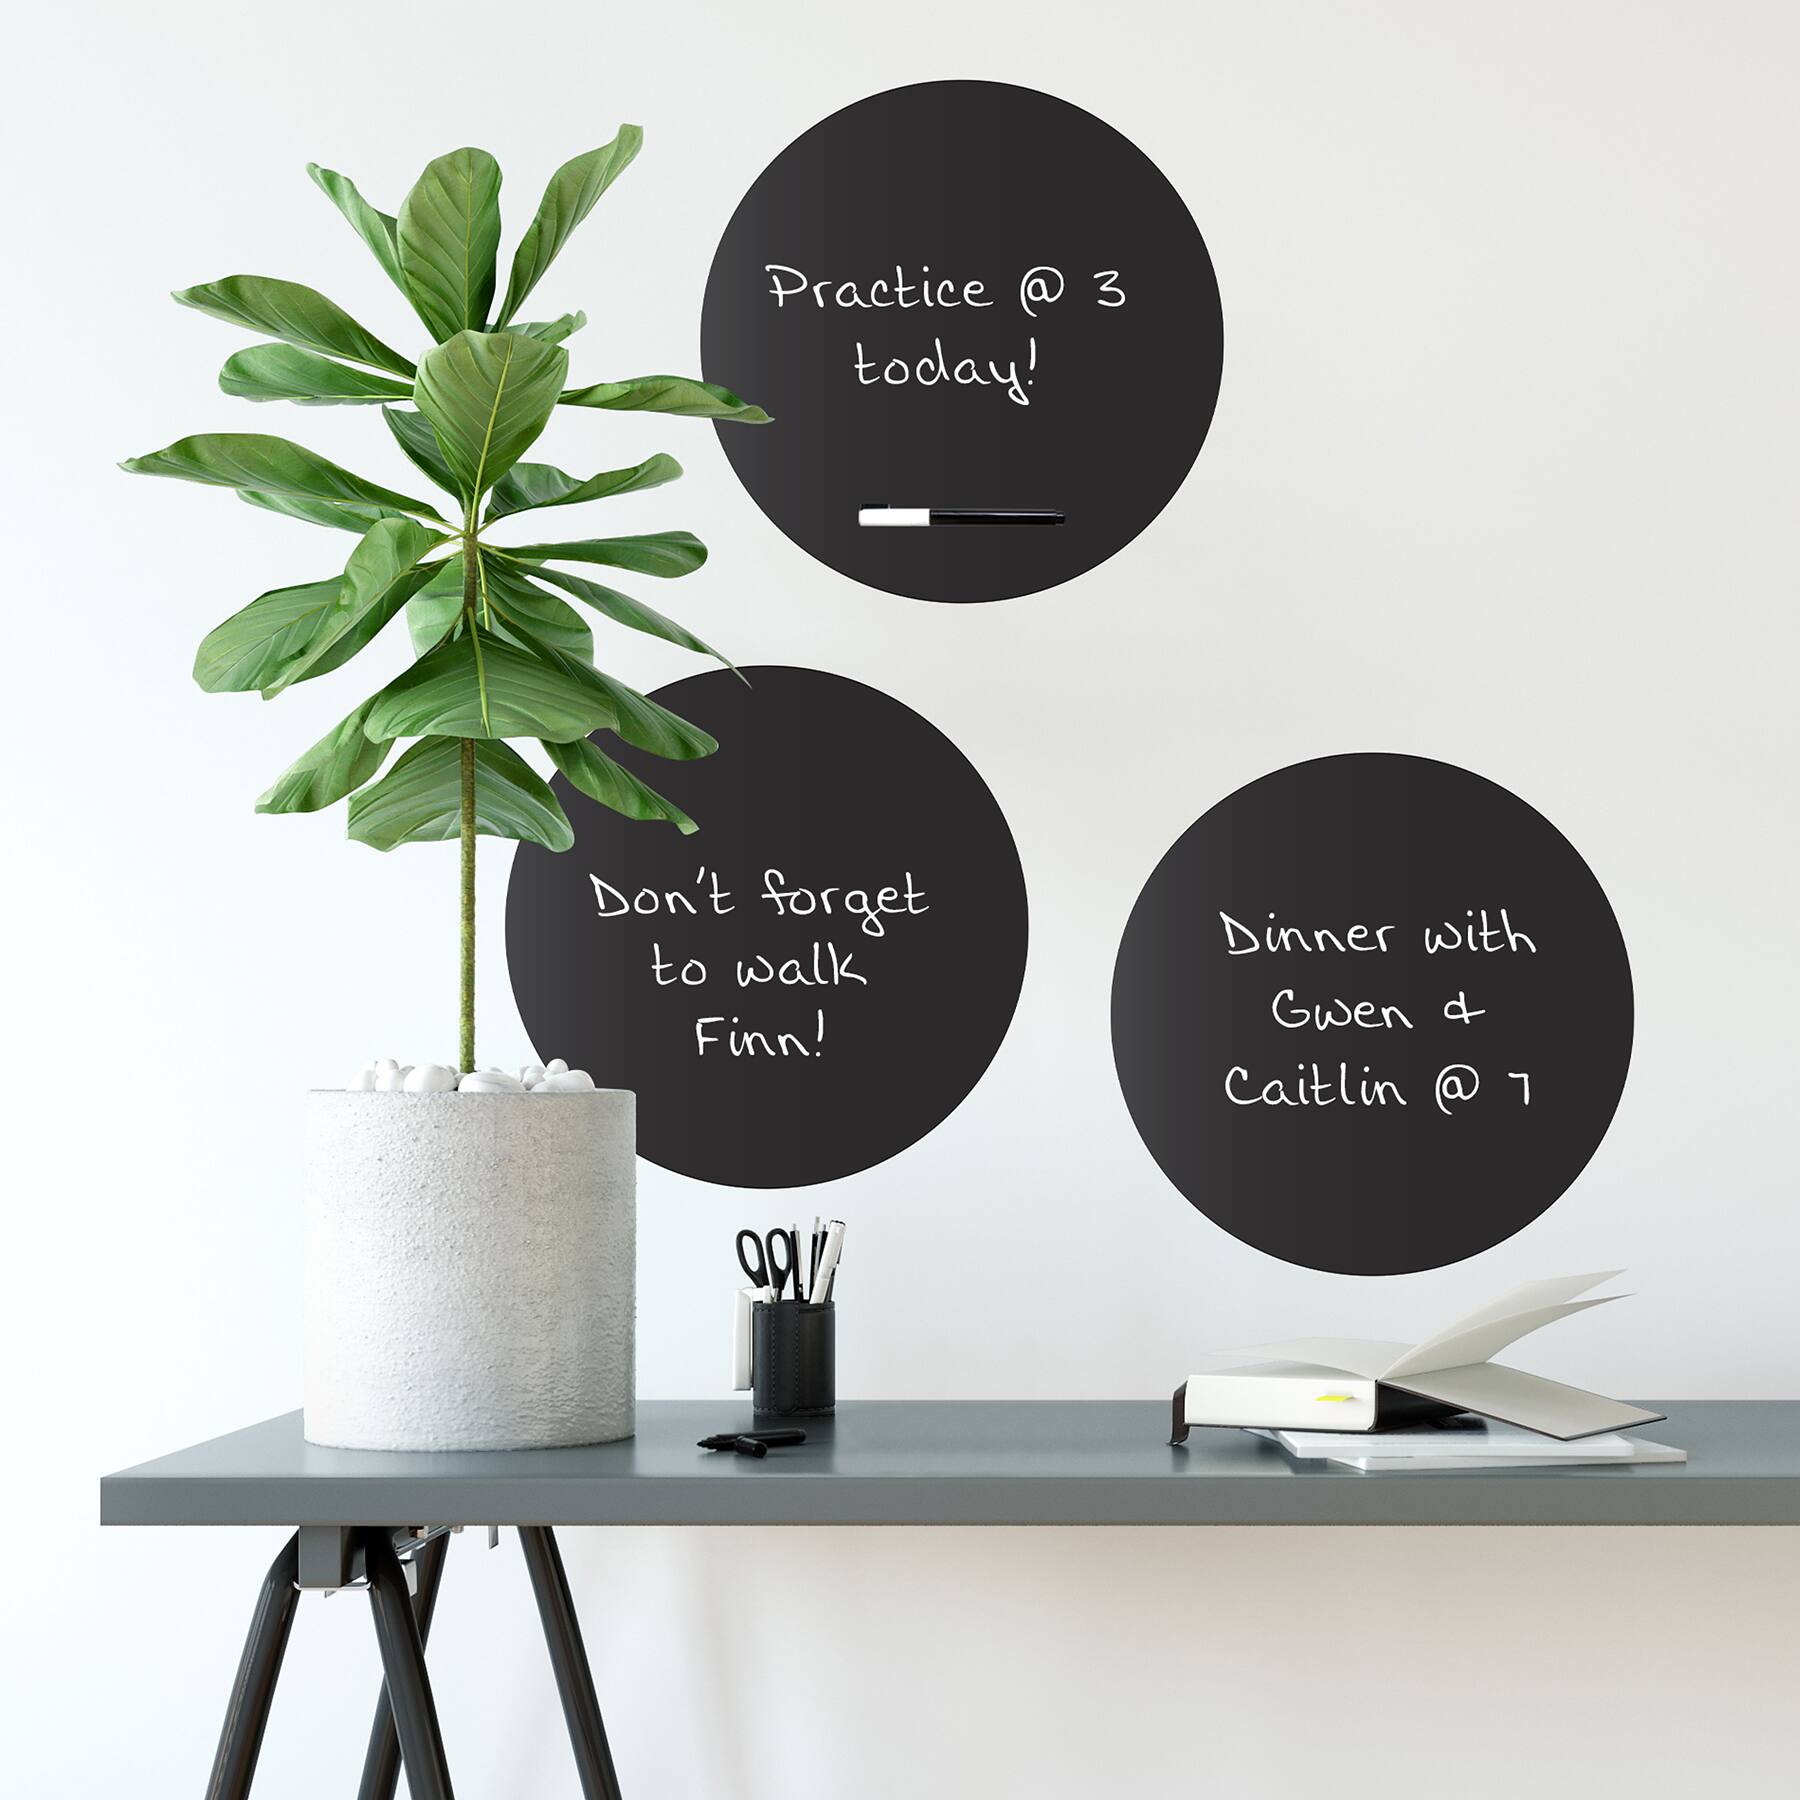 Wallpops Charcoal Dry Erase Dot Decals, 3ct.